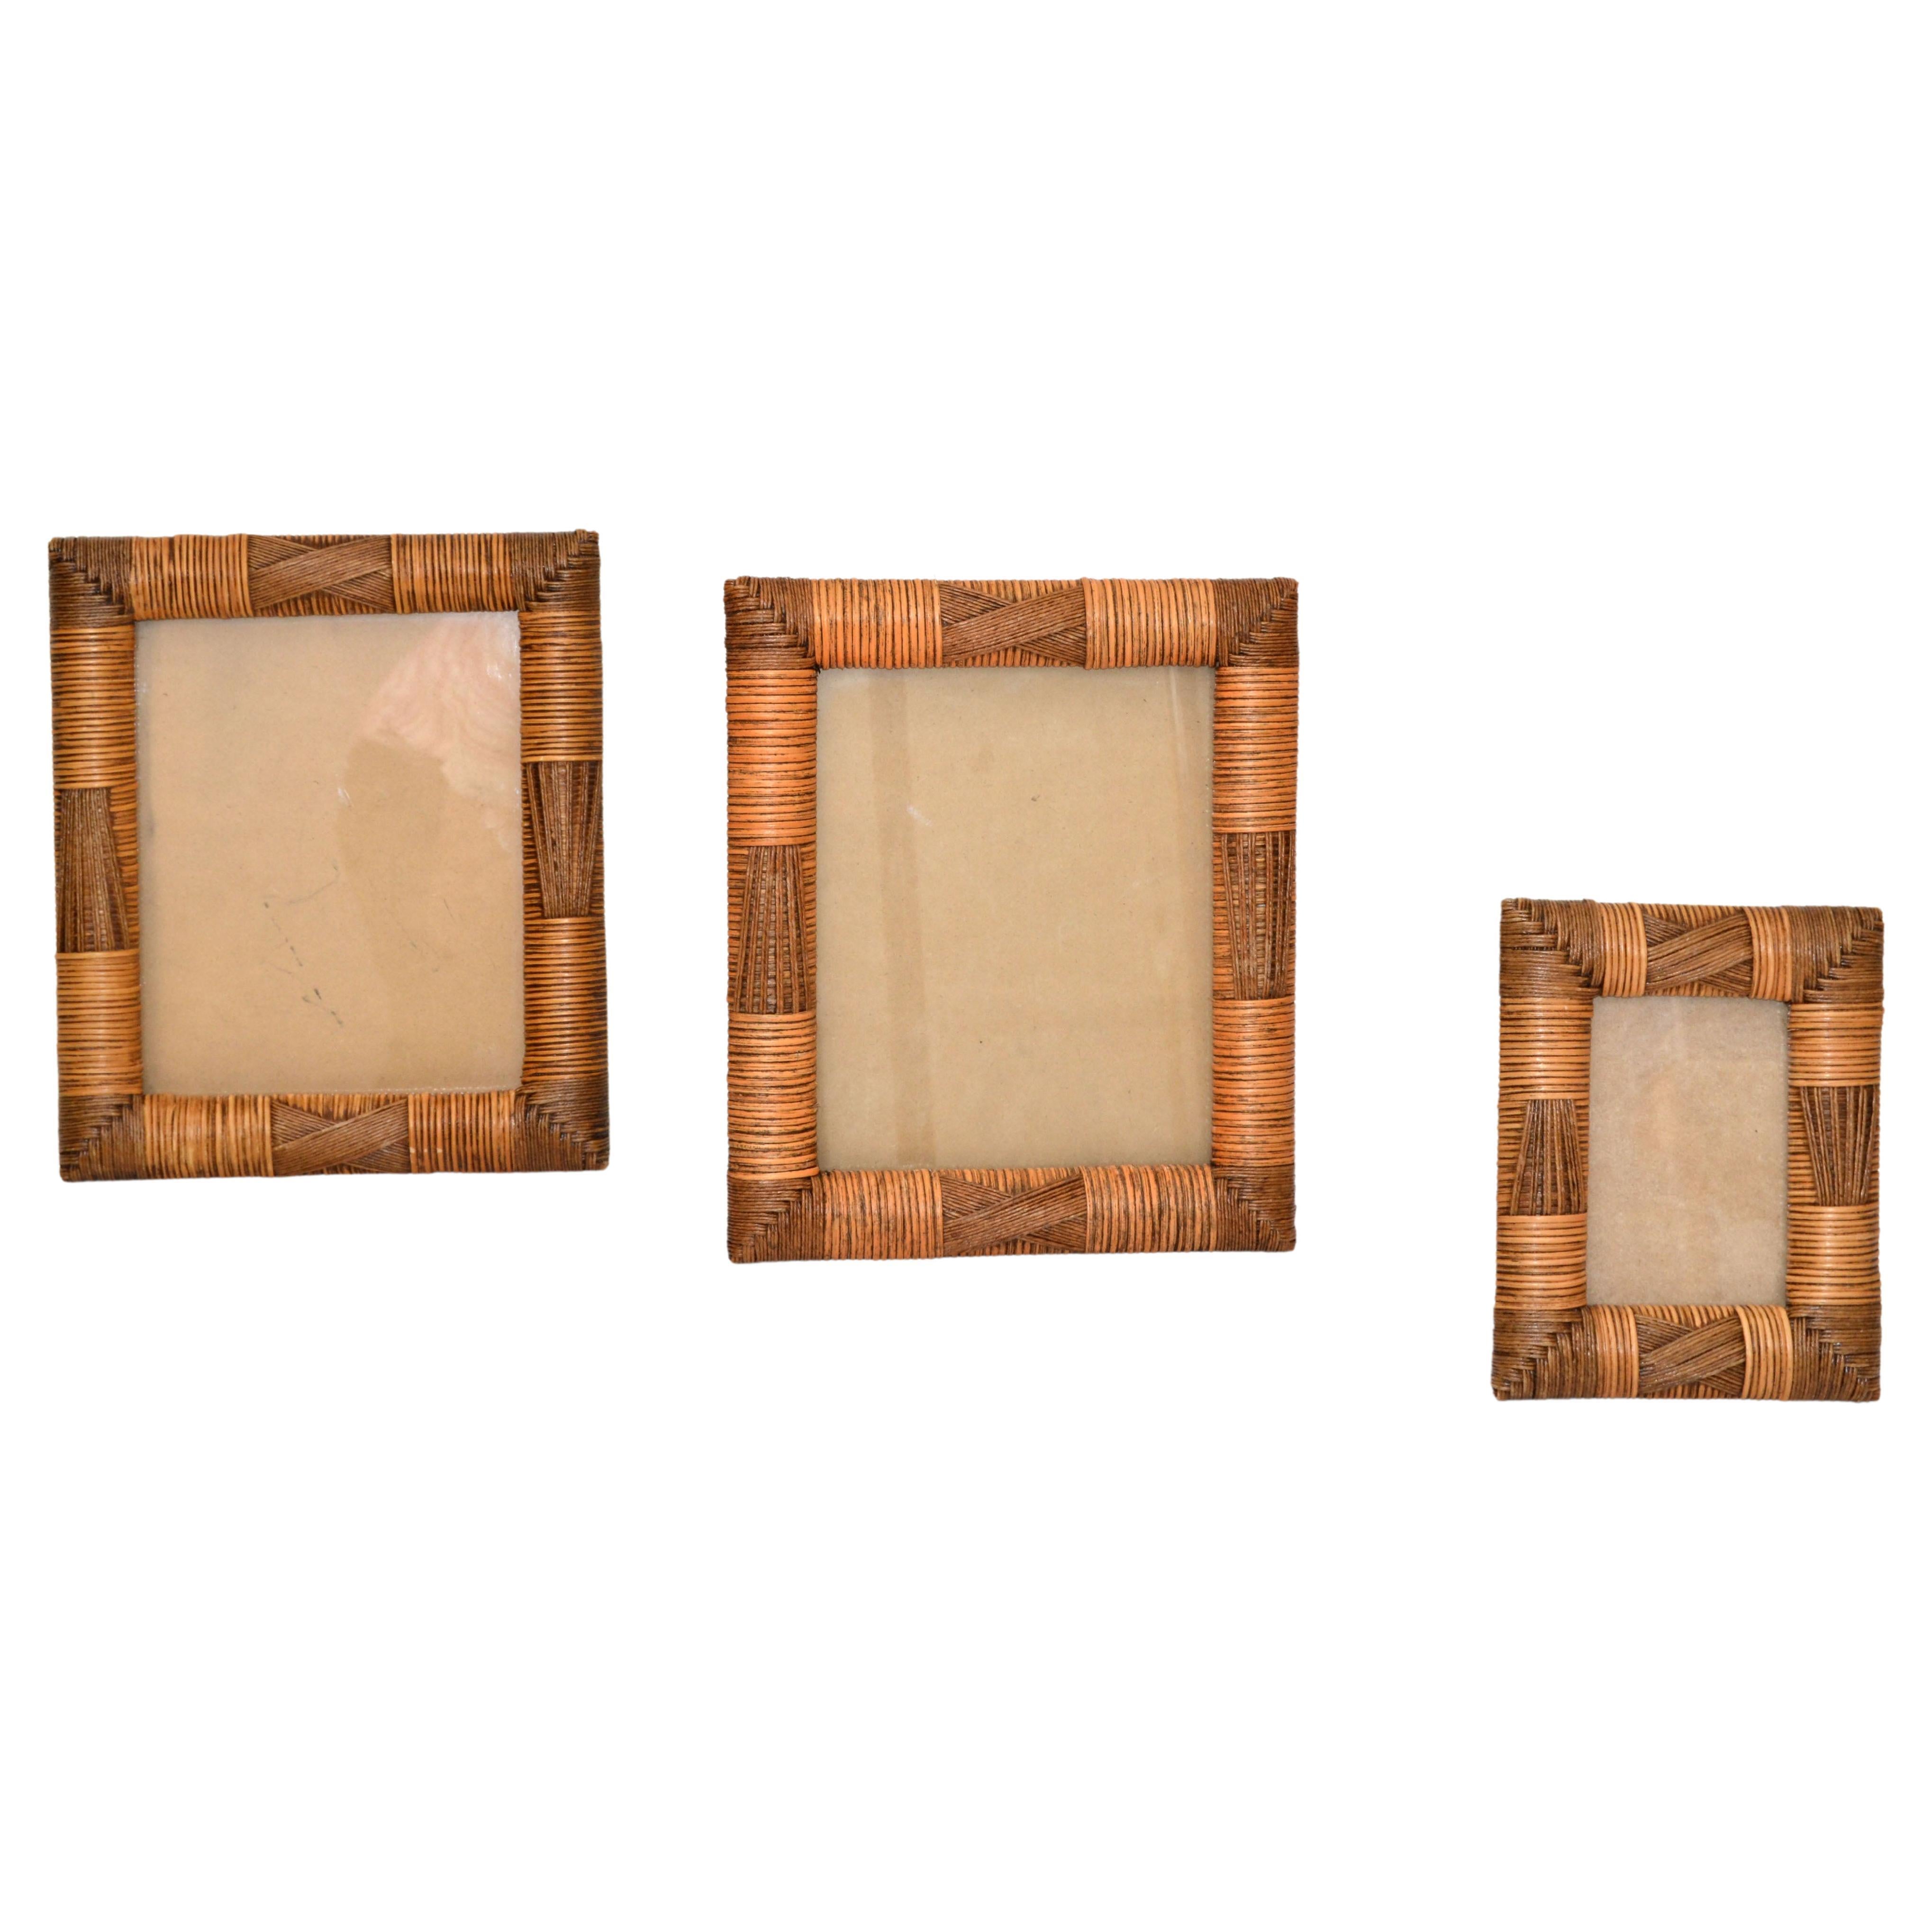 Set of 3 Cane, Wicker & Bamboo Picture Frames Bohemian Chic Mid-Century Modern For Sale